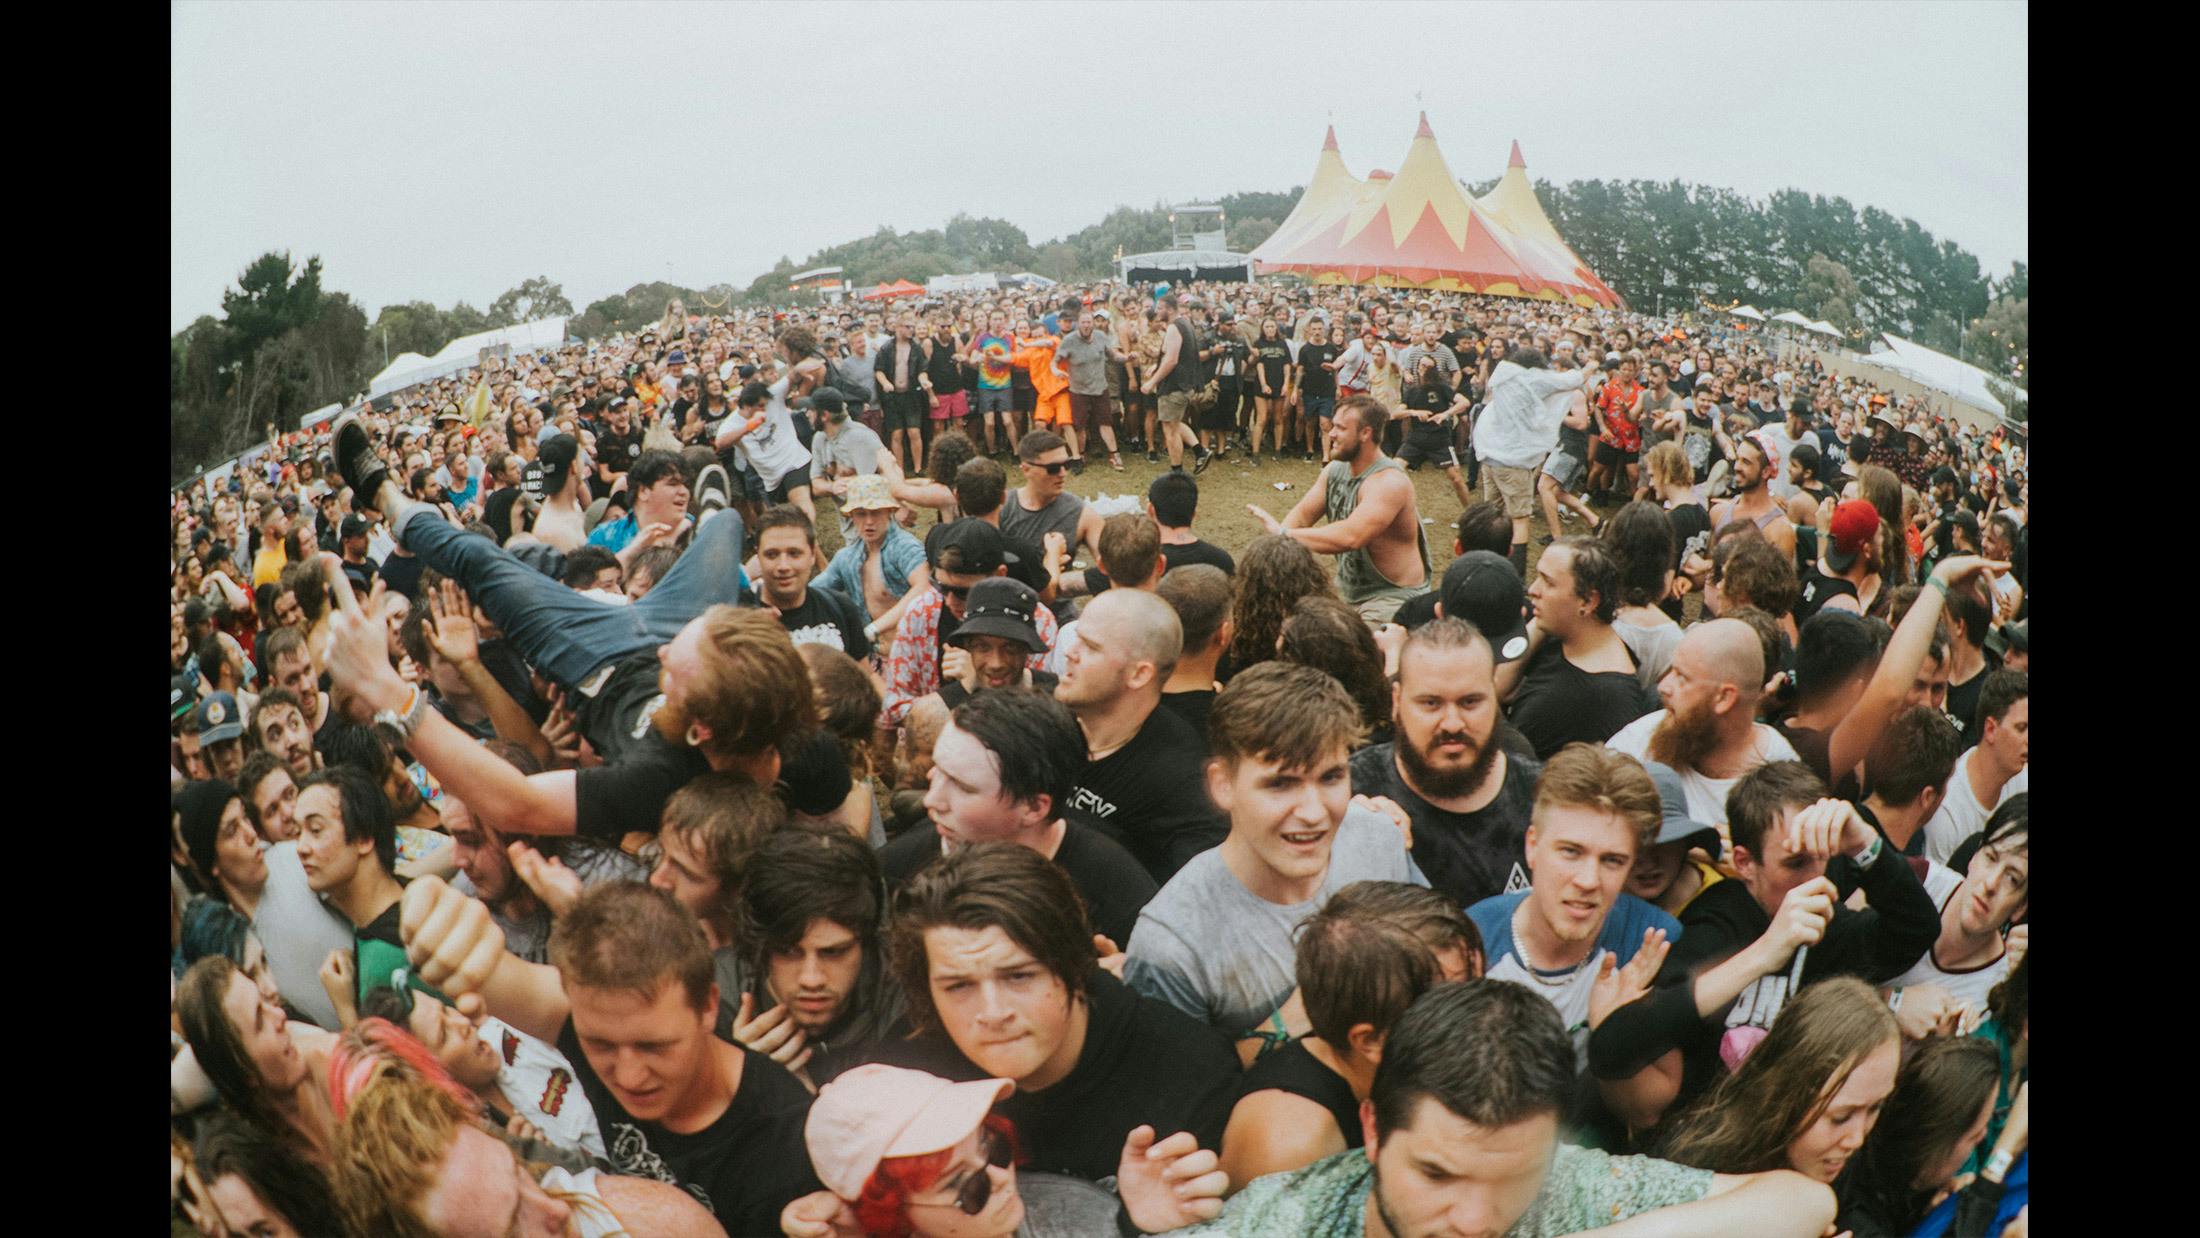 While the likes of Architects and Parkway Drive are undoubtedly festival highlights, due to their sheer size, production levels and back-catalogues, Knocked Loose are easily the best 'young' band of the day. Just look at that crowd. Oooof.